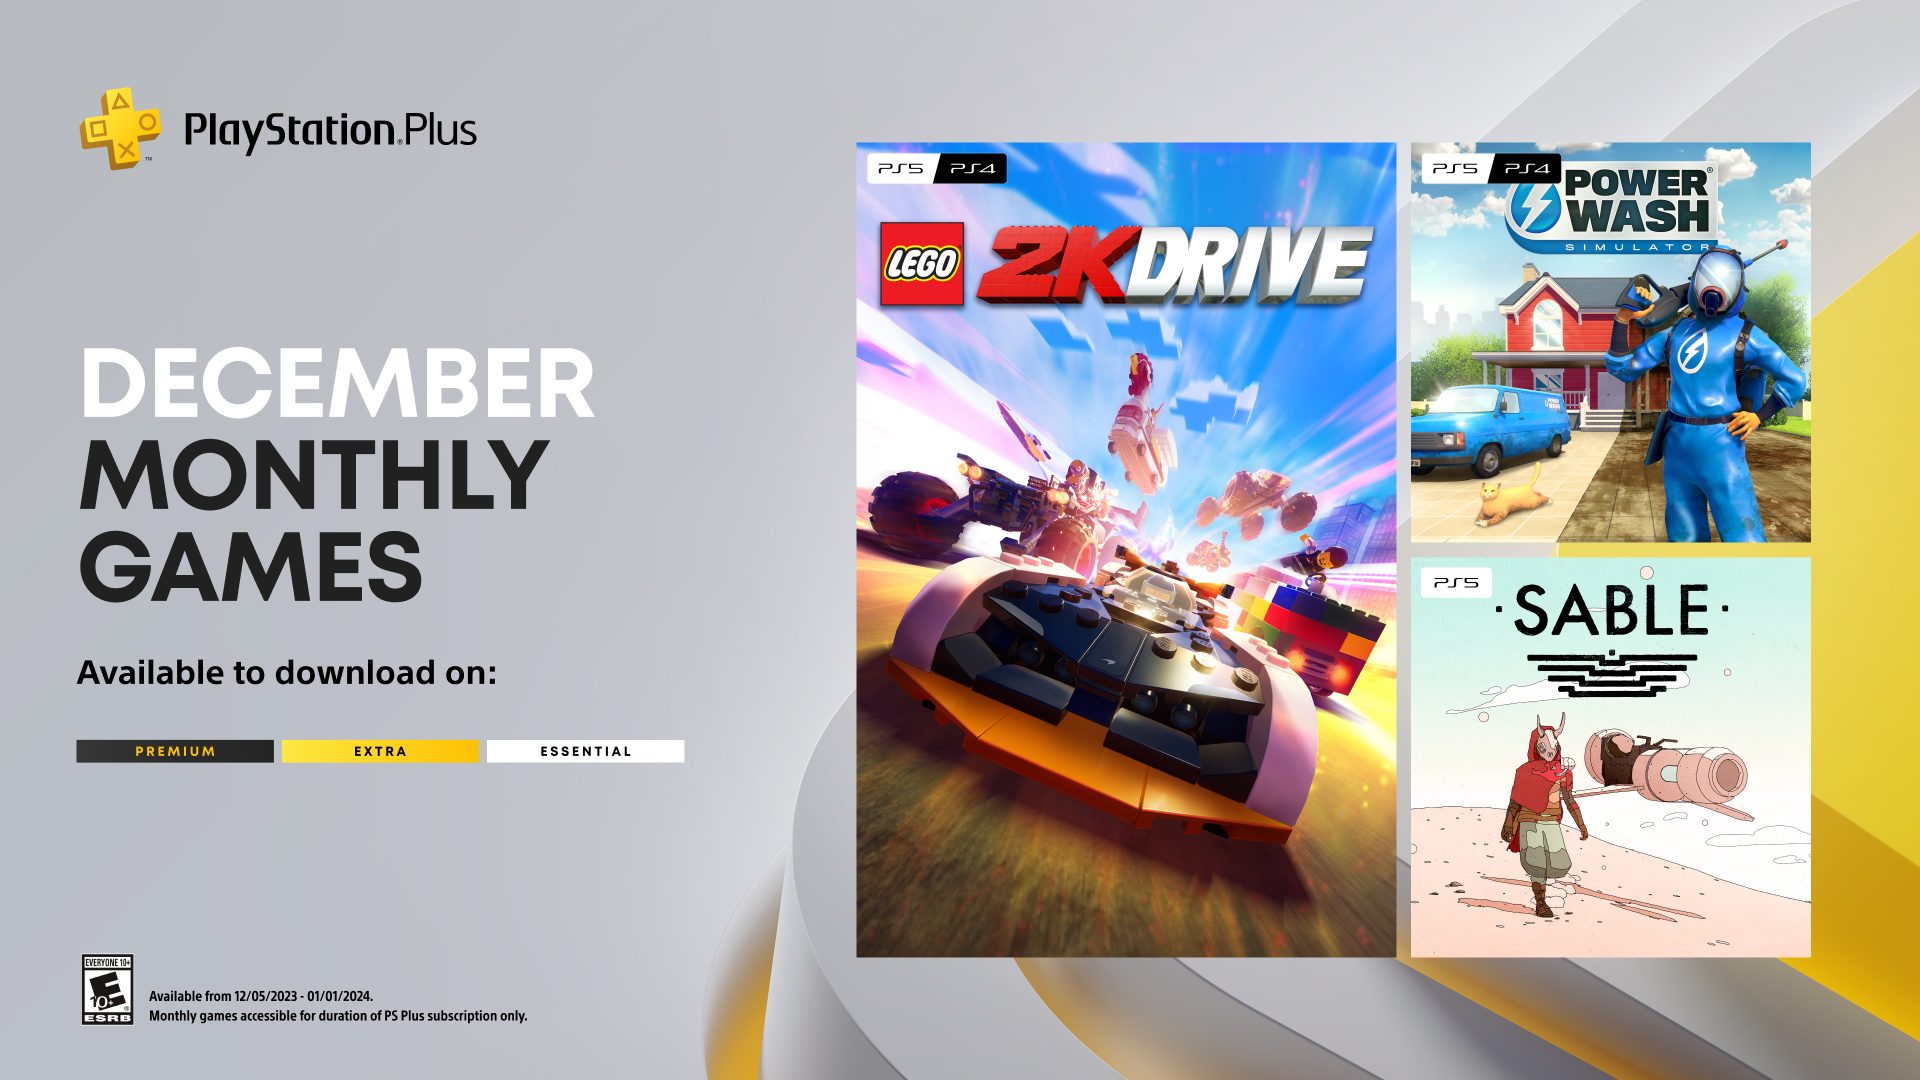 PlayStation Plus Monthly Games for December: Lego 2K Drive, Powerwash  Simulator, Sable – PlayStation.Blog